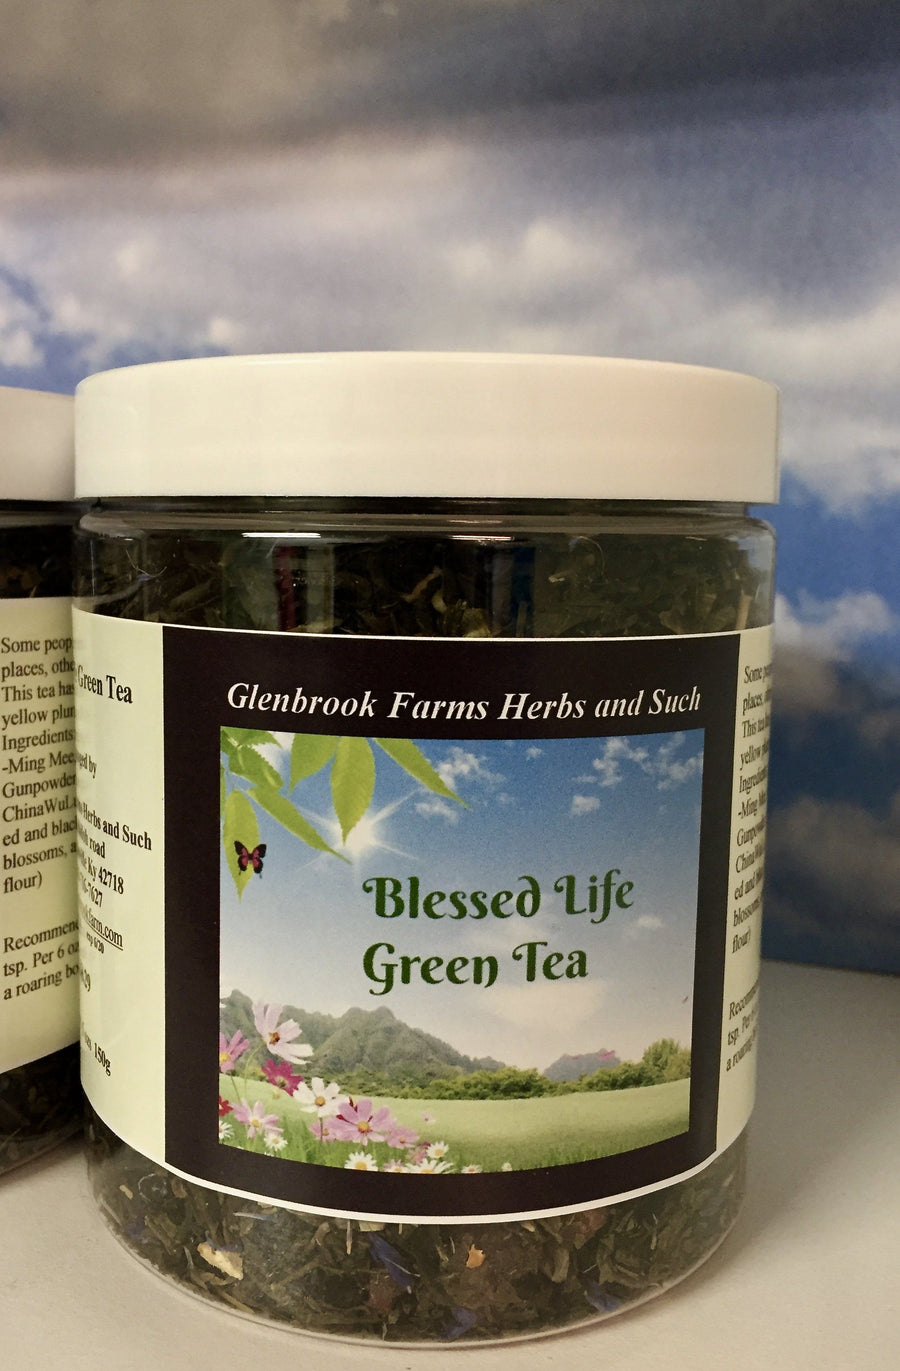 Blessed Life Green Tea from Glenbrook Farms. One of our best sellers!